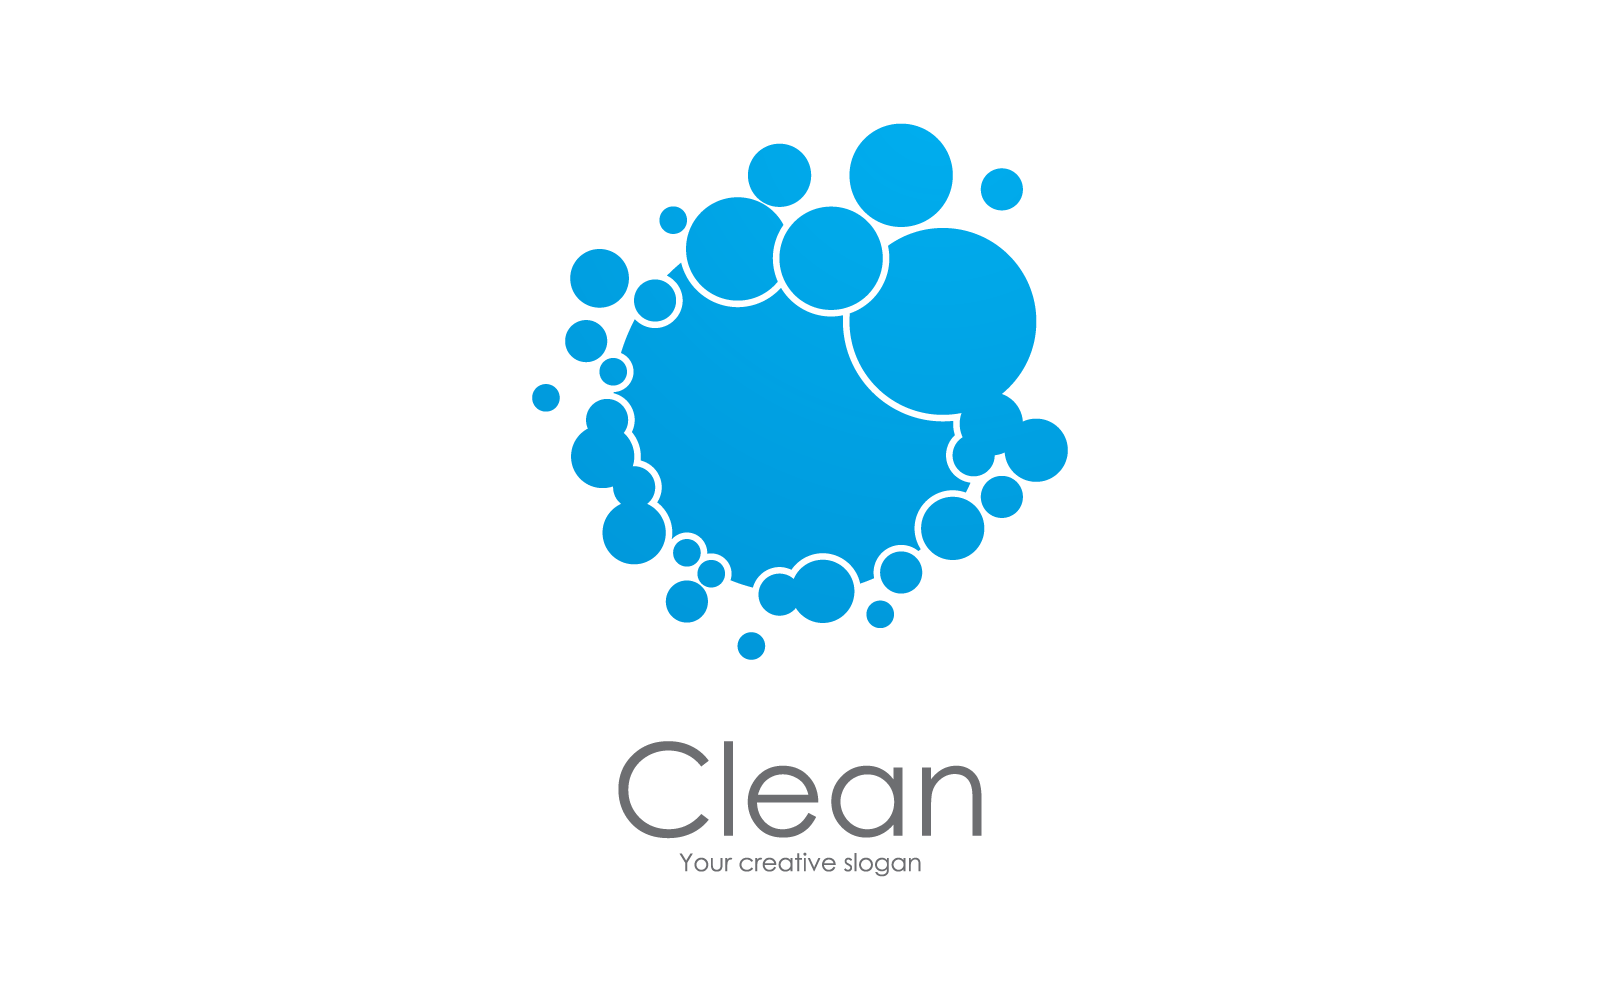 Cleaning design logo and symbol illustration vector template